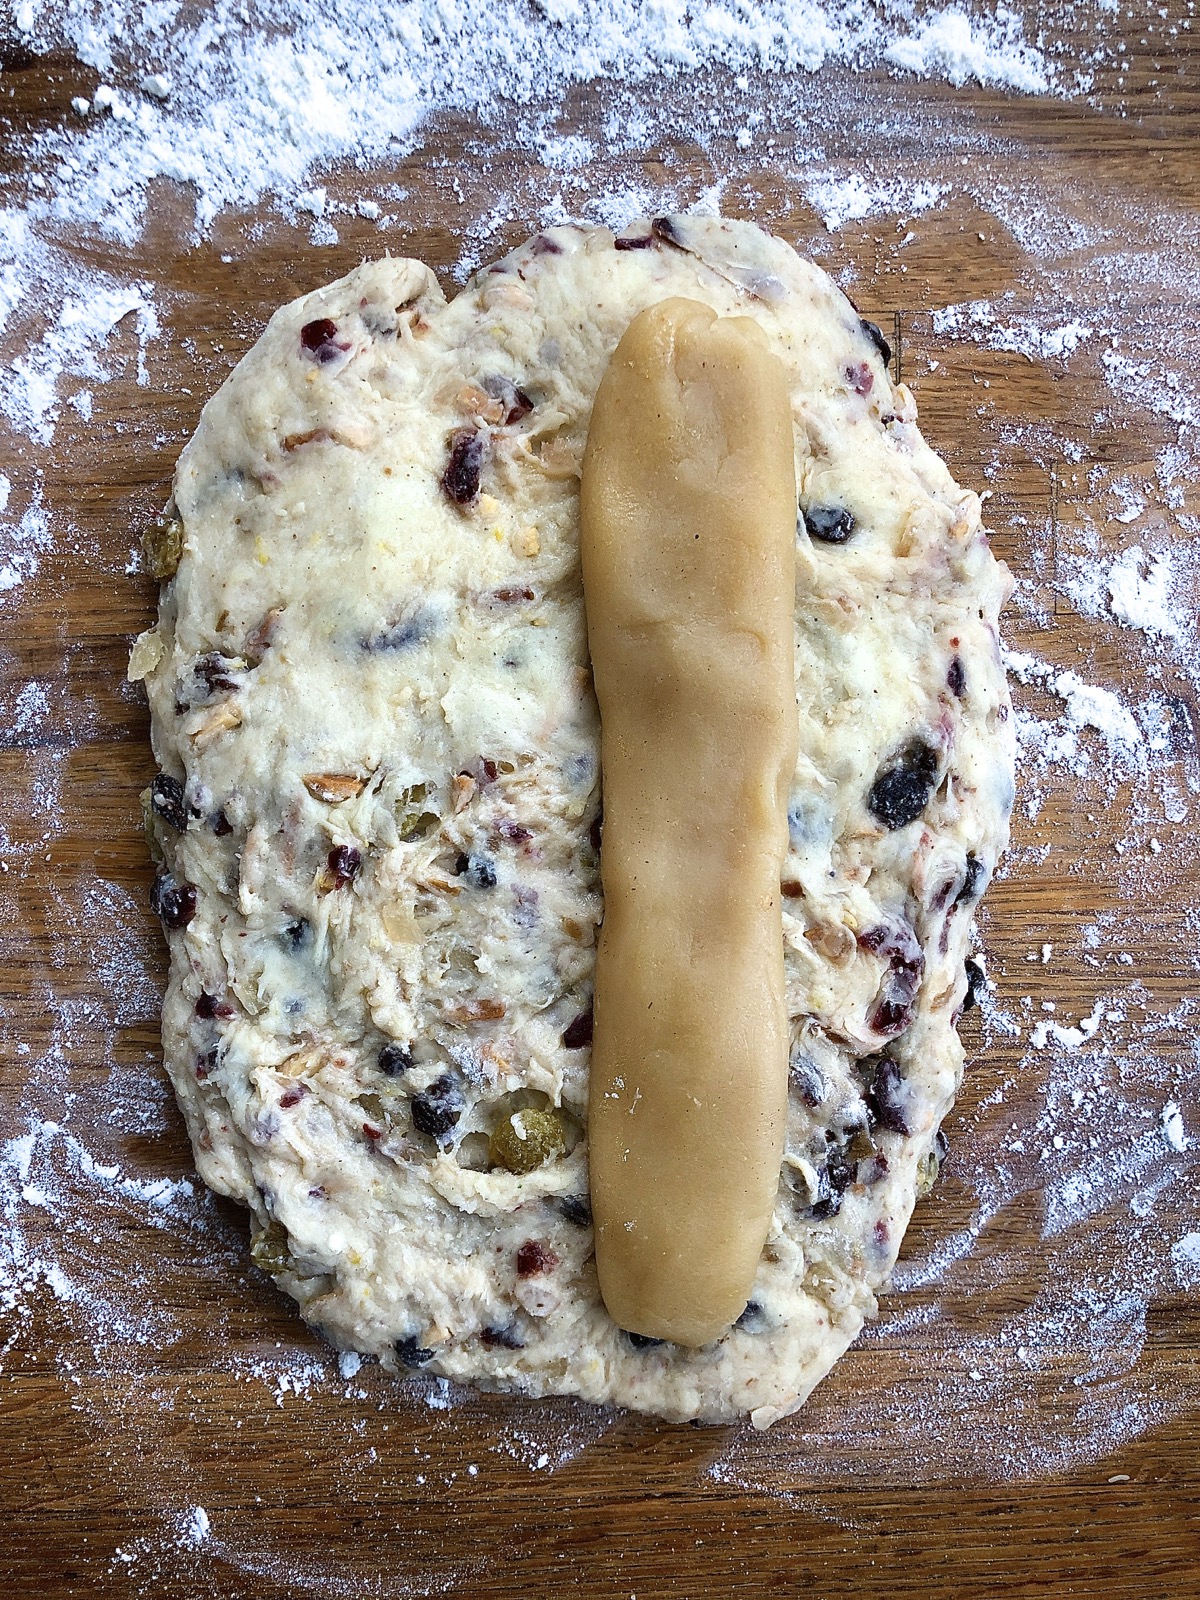 Flattened oval of stollen dough with a log of almond paste offset on top, ready to seal inside.